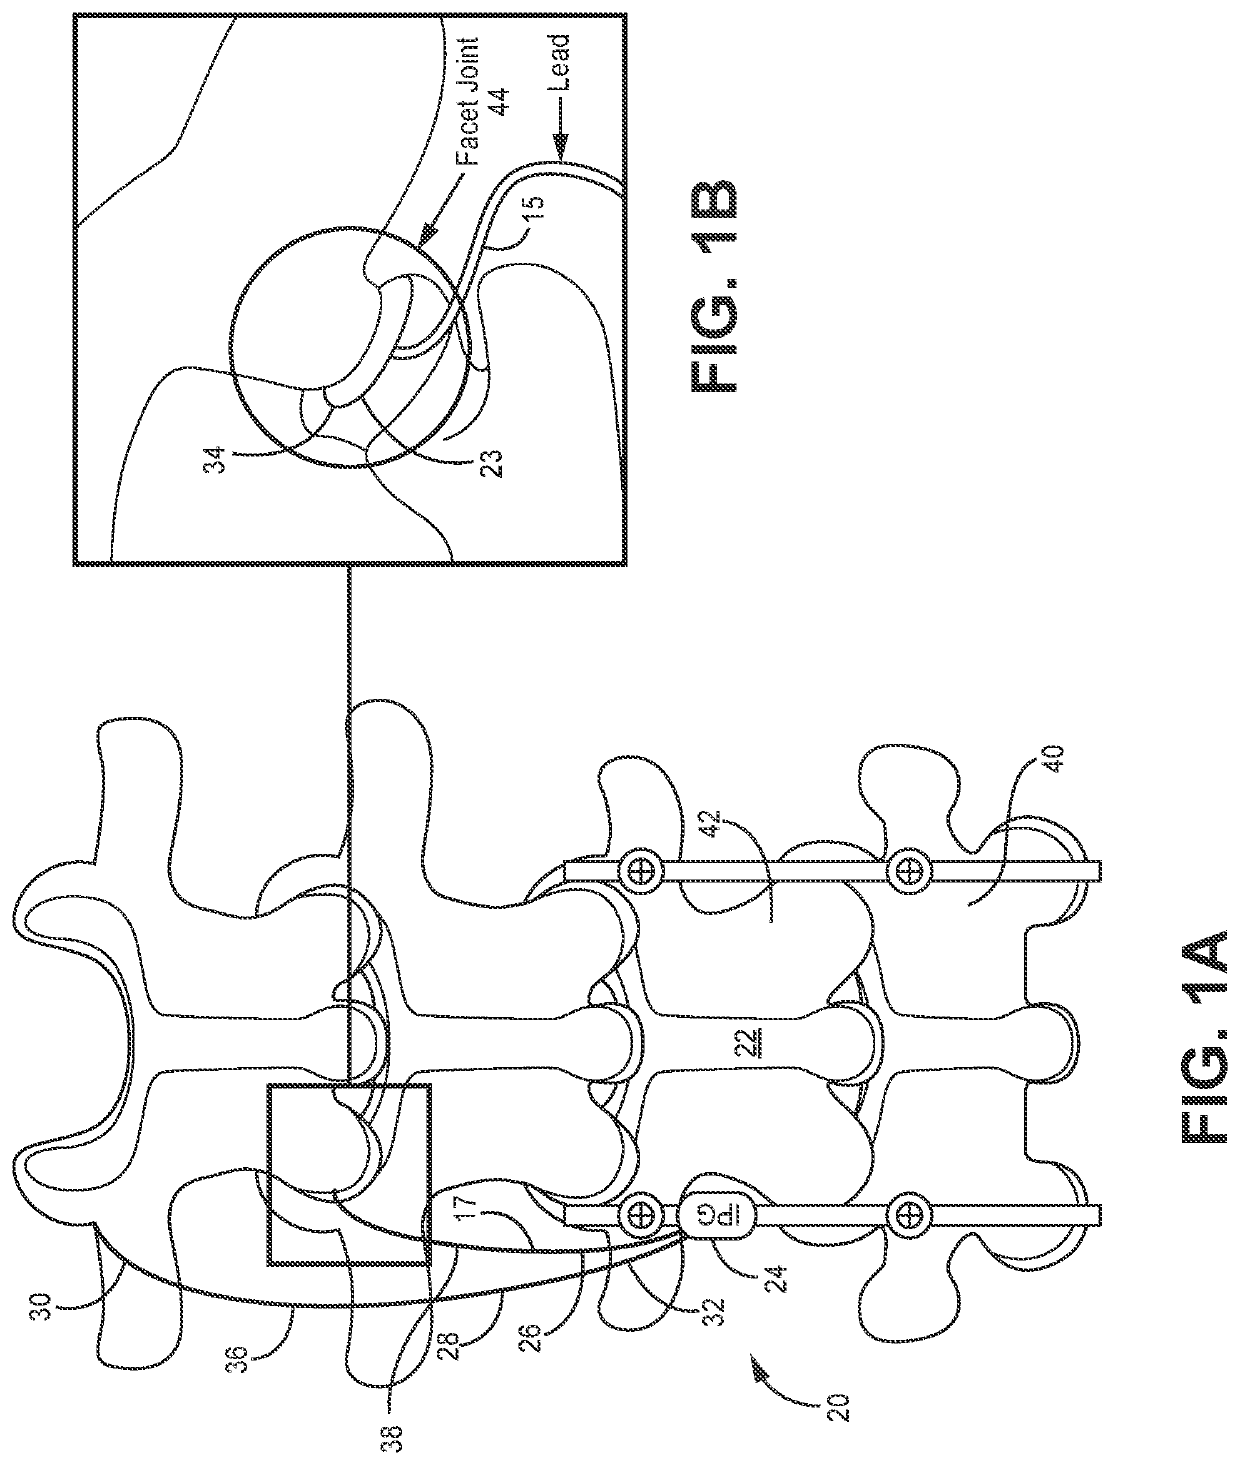 Systems, devices and methods for placement and fixation of neuromodulation system in combination with a laminectomy procedure